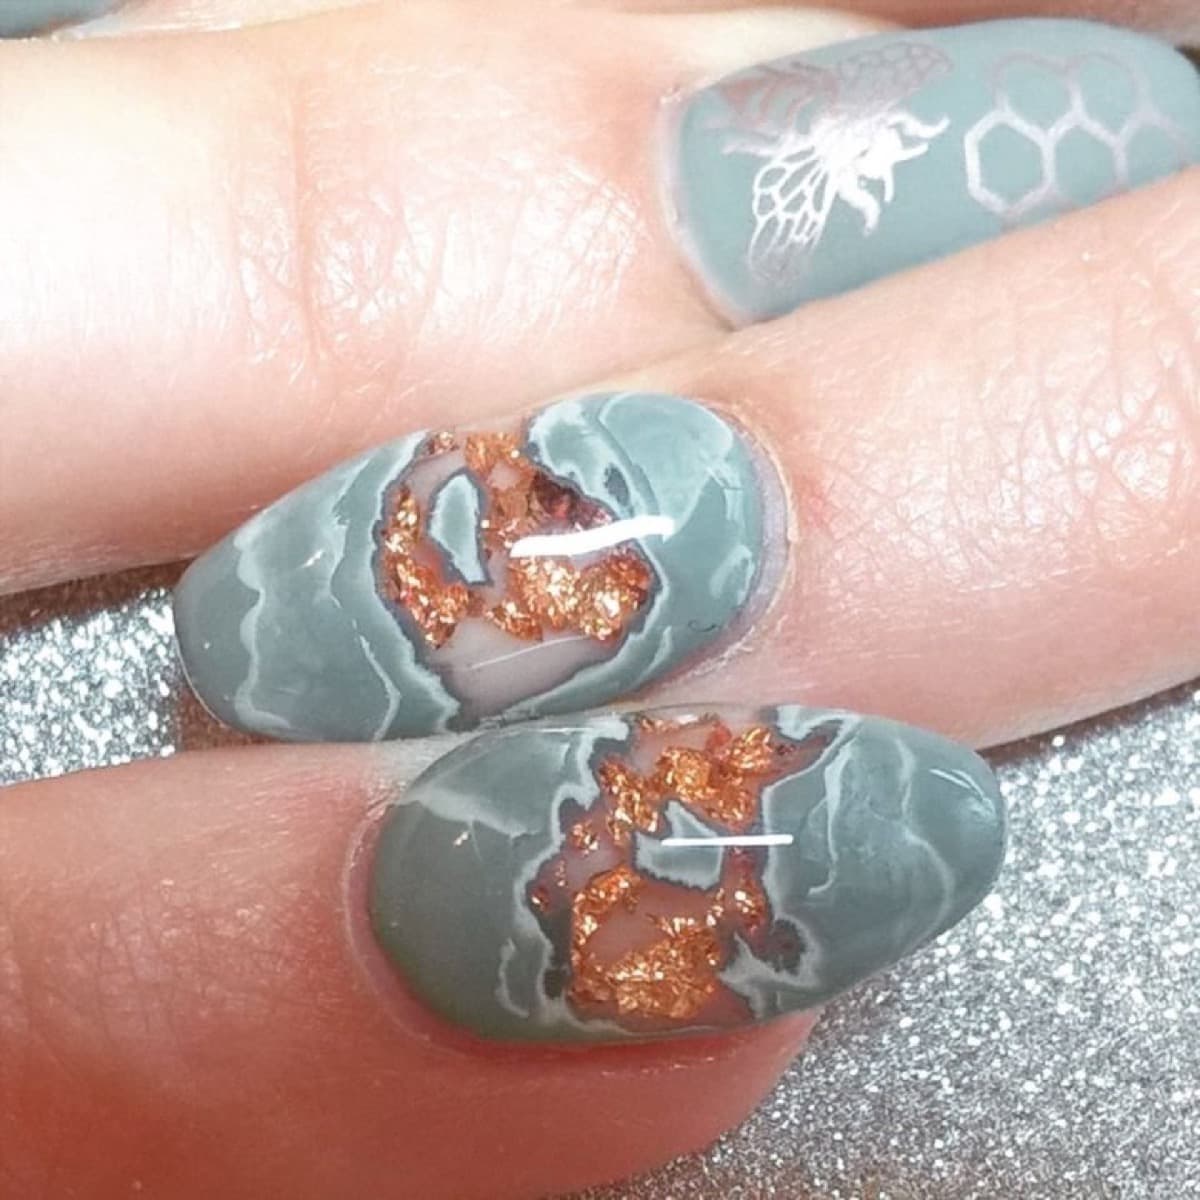 Marble manicure